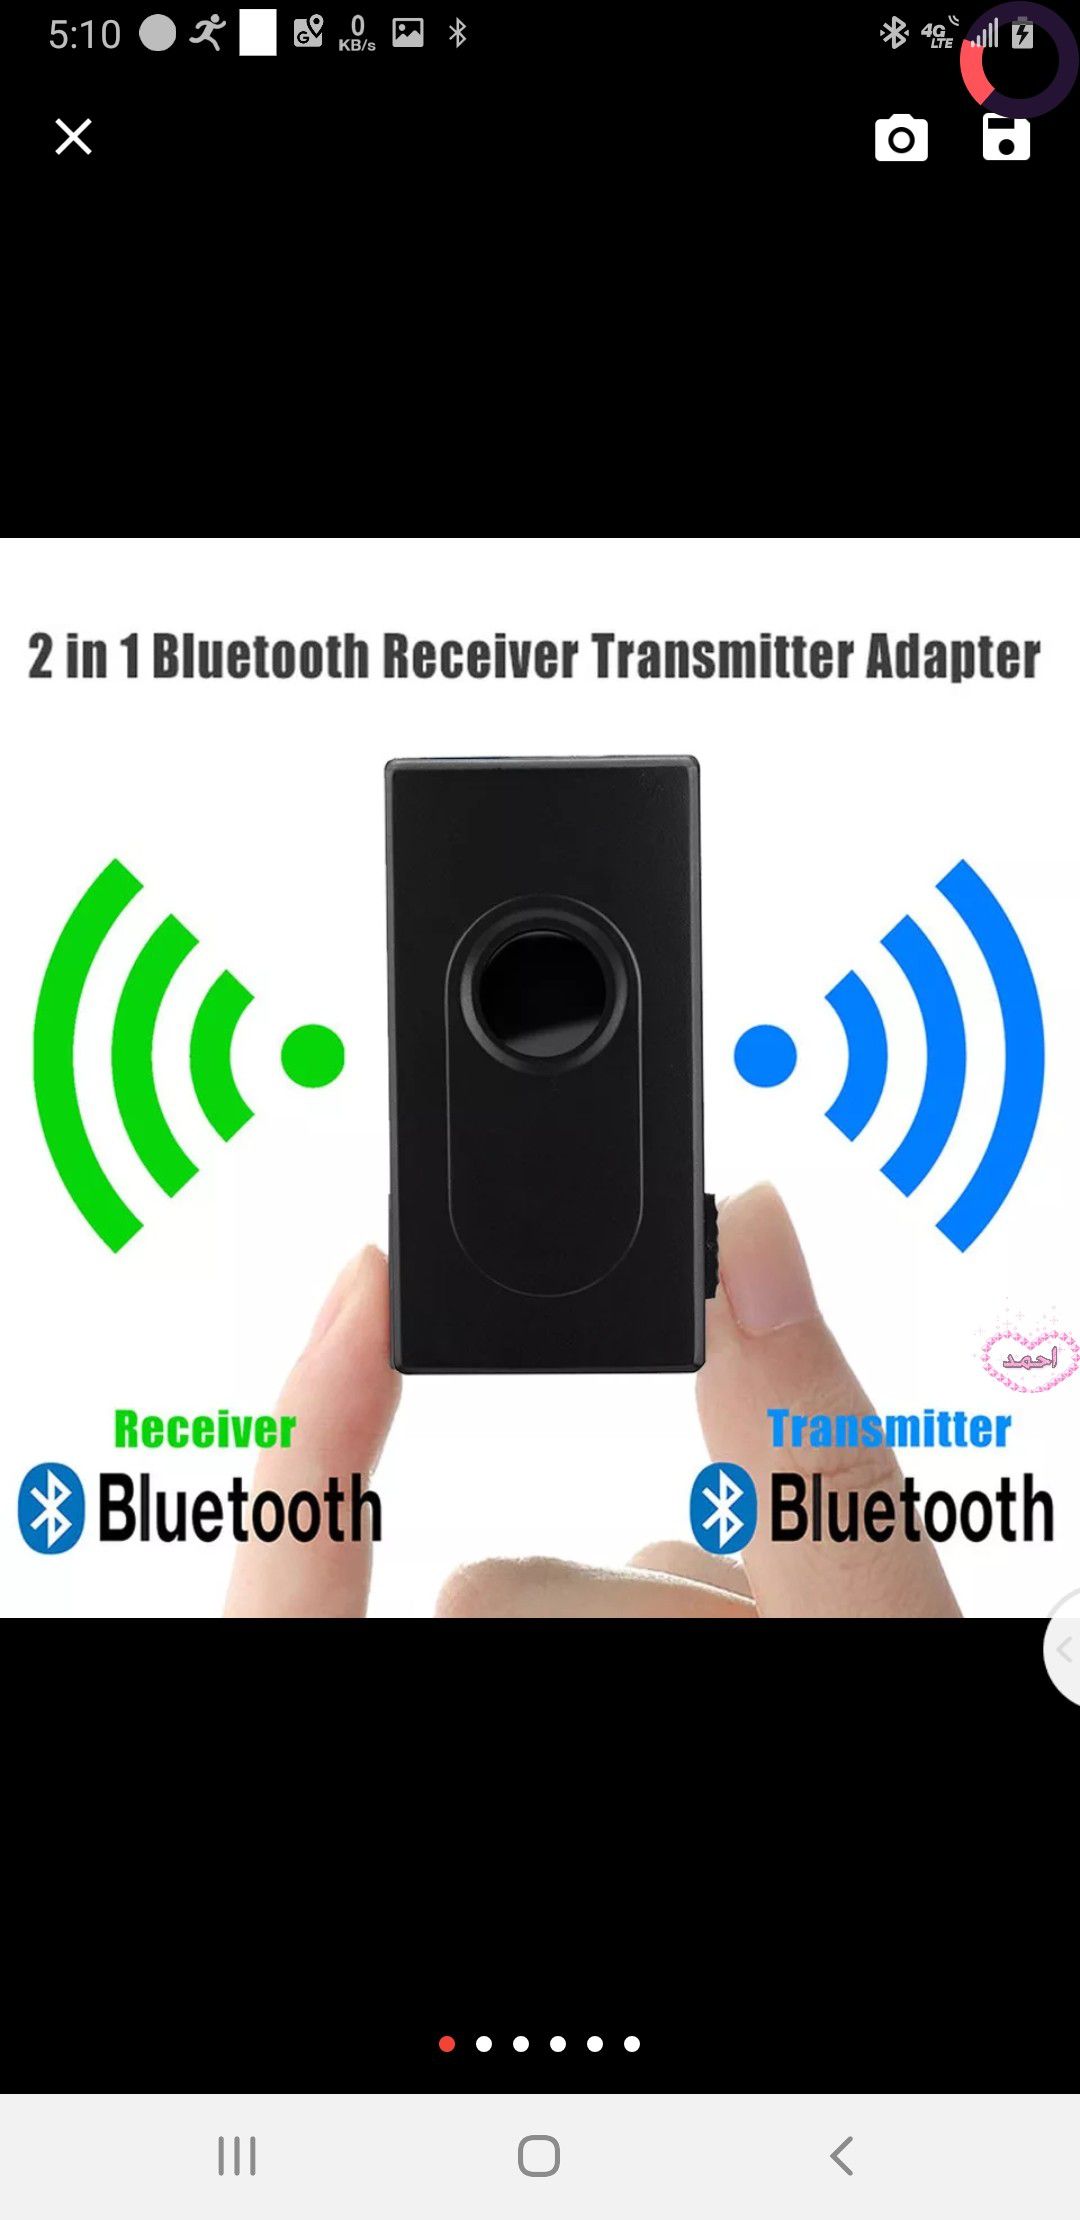 3luetooth V4 Transmitter Receiver Wireless \2DP 3.5mm Stereo Audio Music Adapter for hone PC Y1X2 MP3 MP4 TV PC